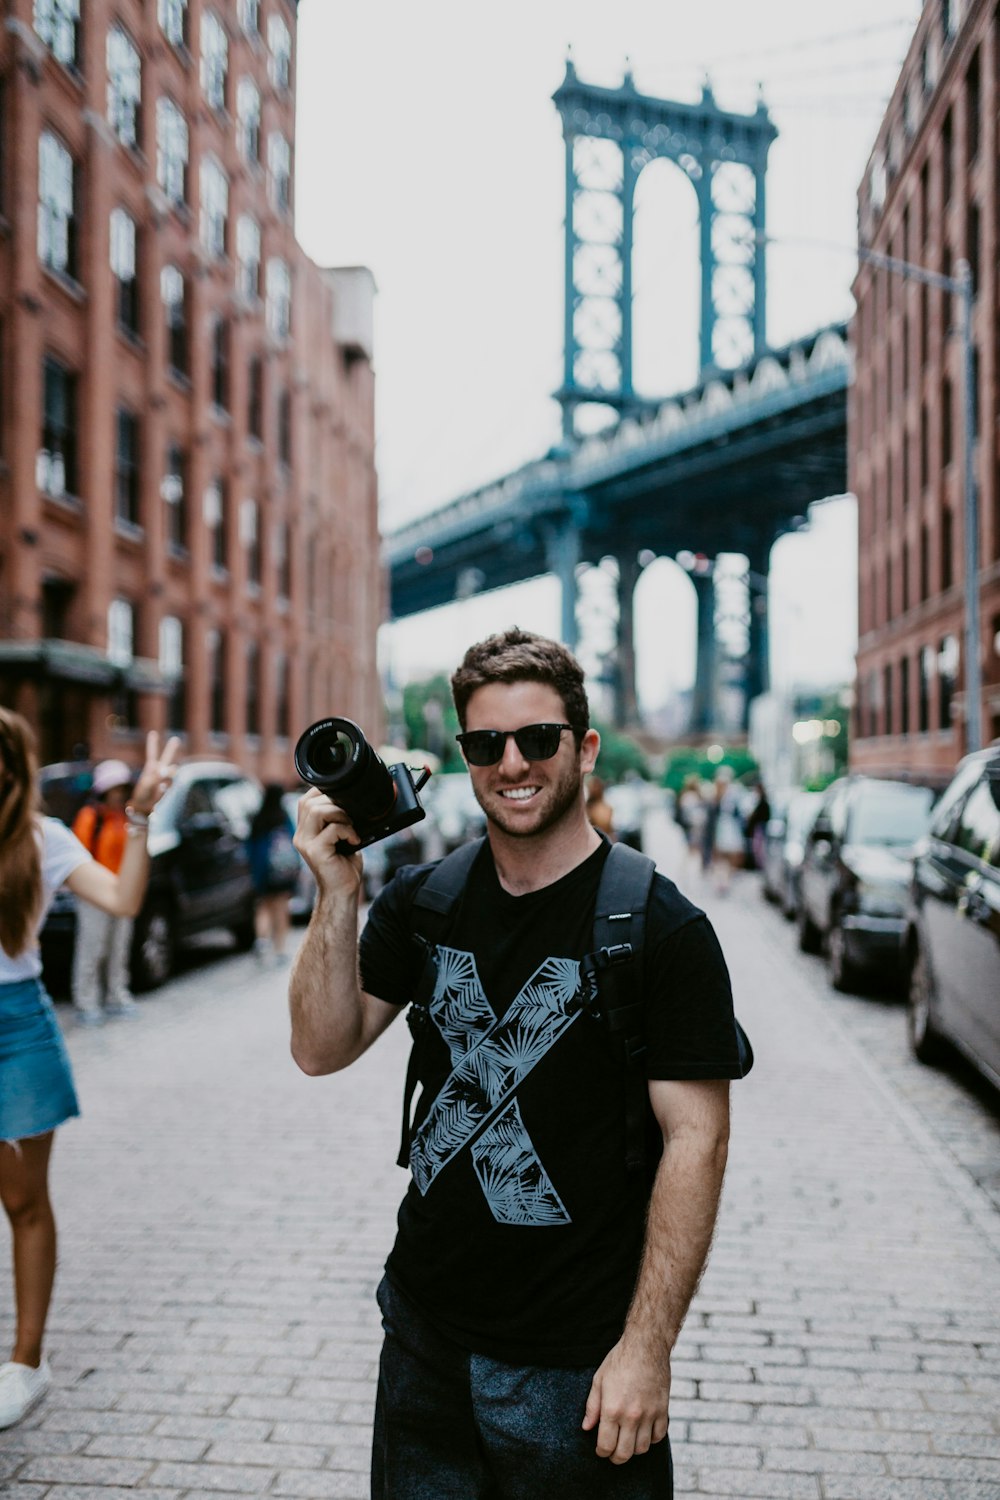 smiling man holding DSLR camera carrying backpack near parked cars during daytimes